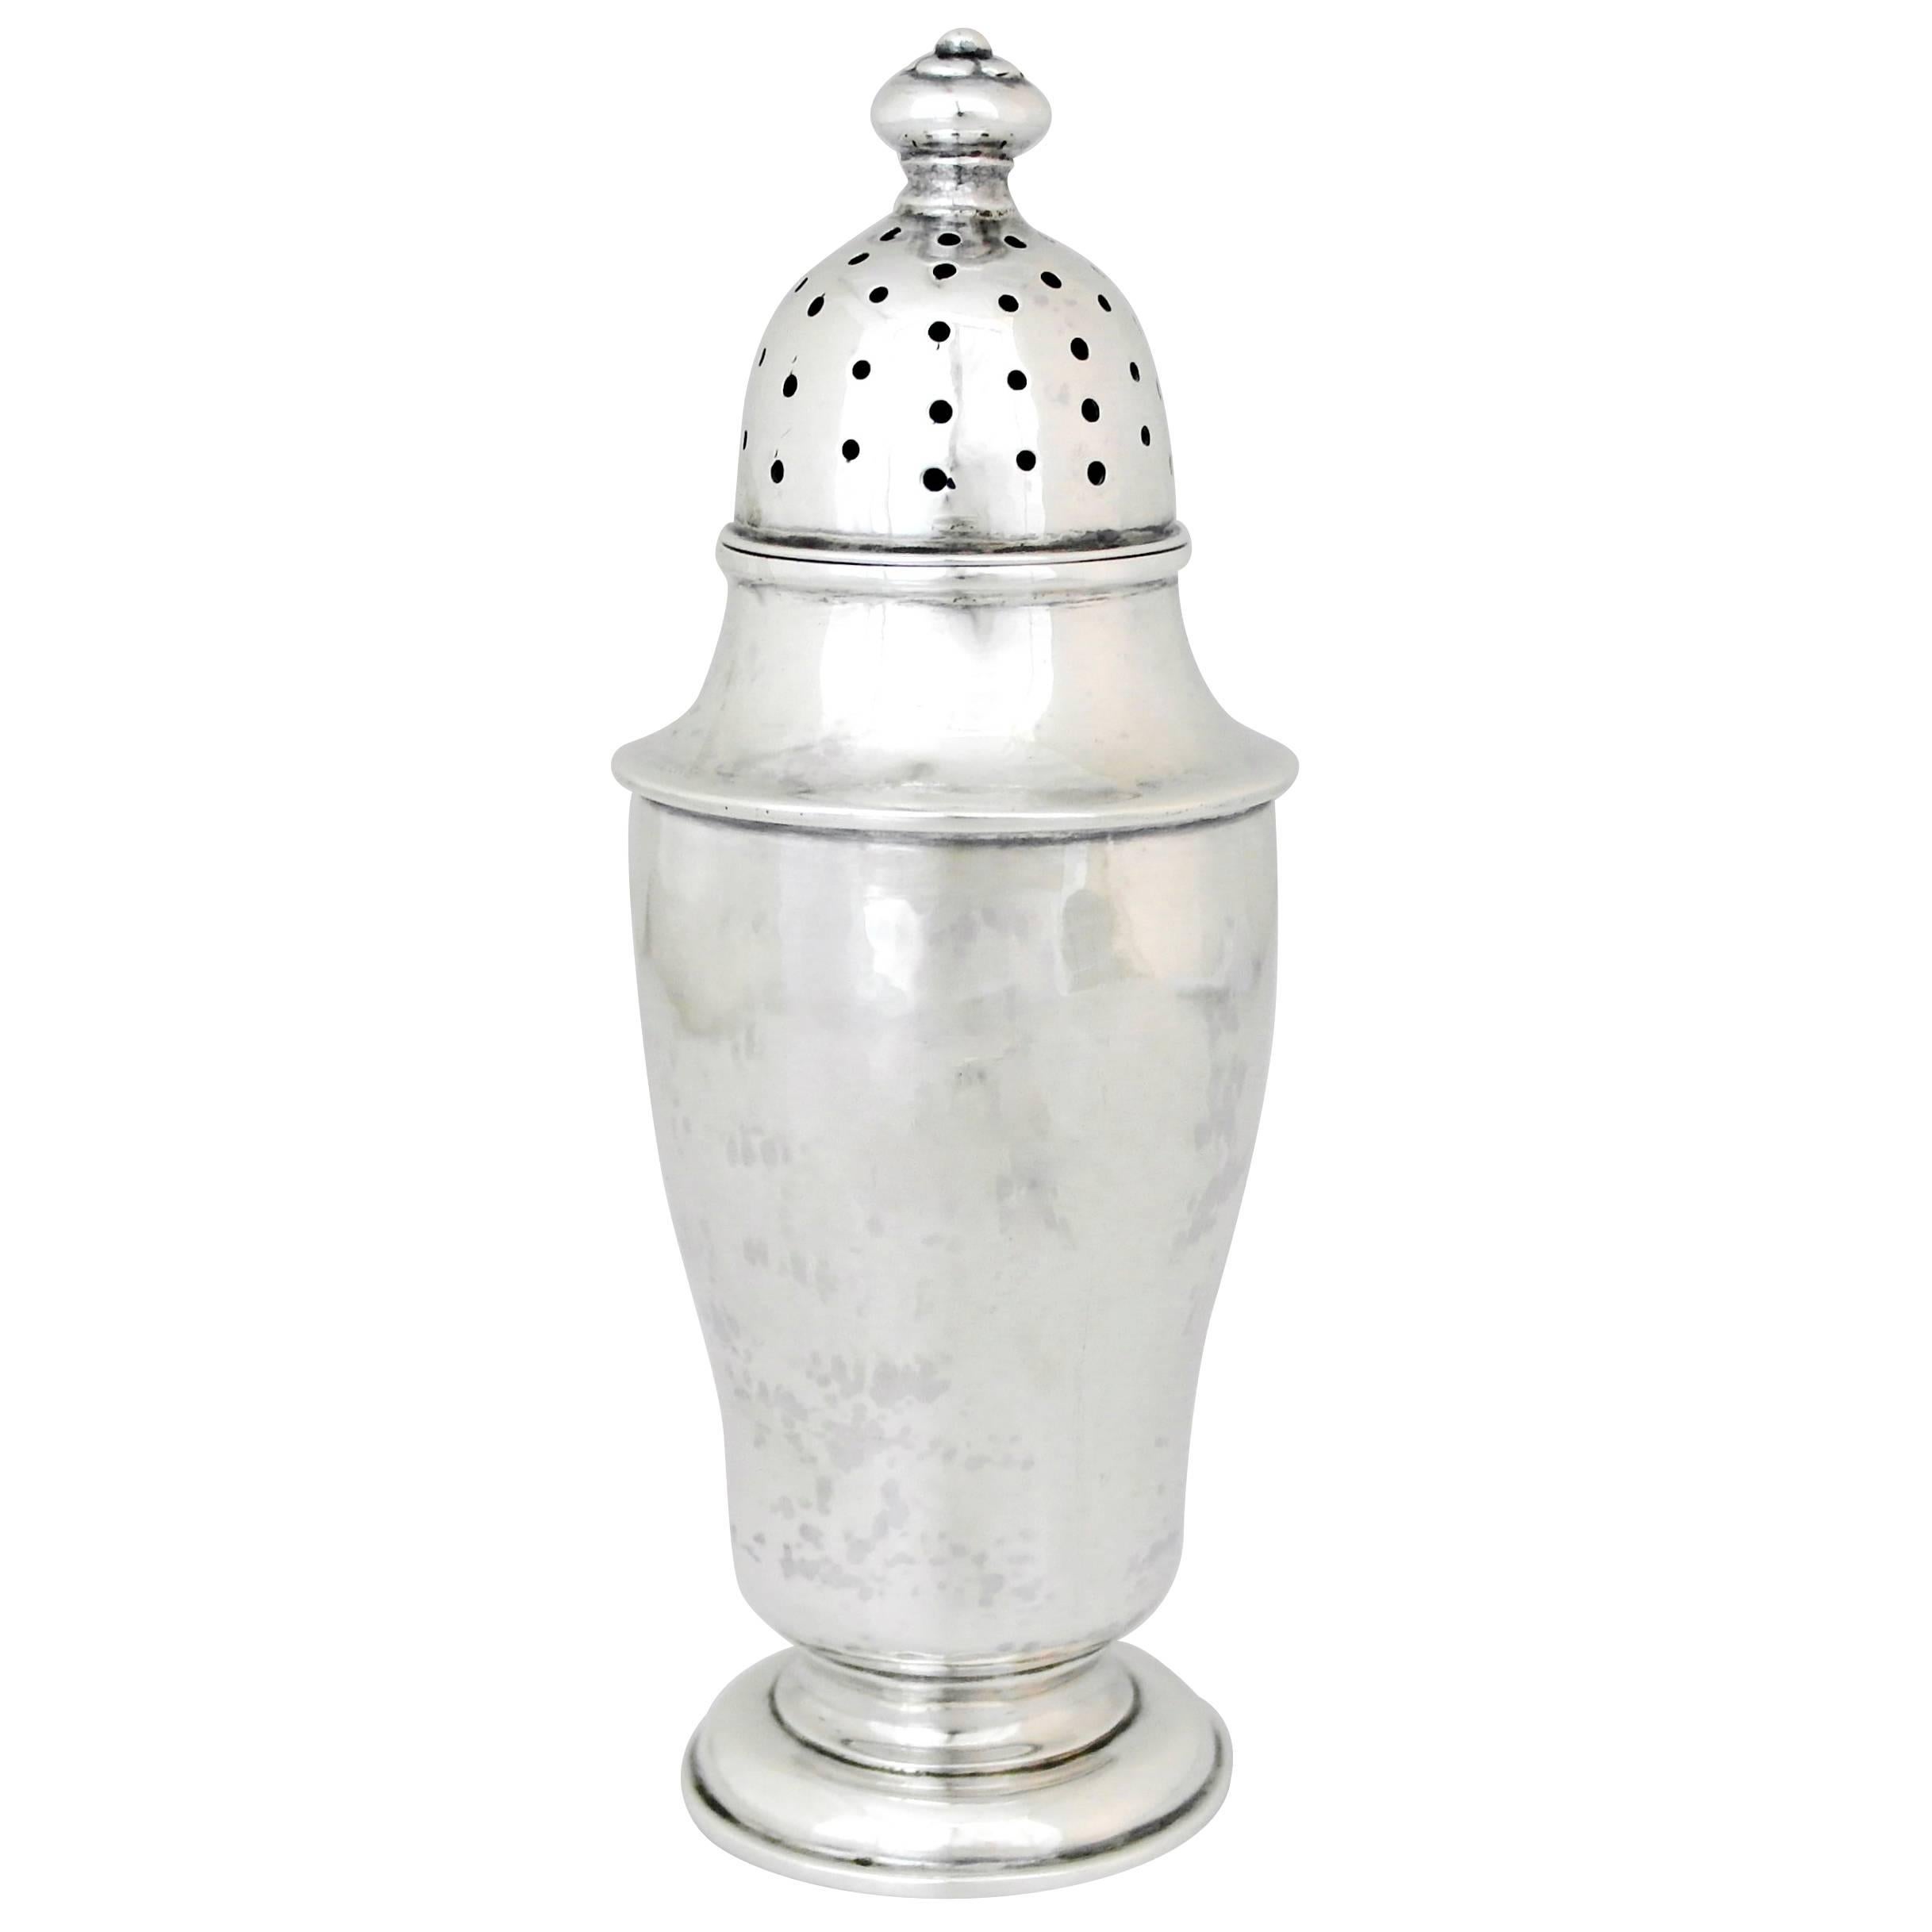 James Woolley Boston Arts & Crafts Sterling Silver Sugar Caster For Sale